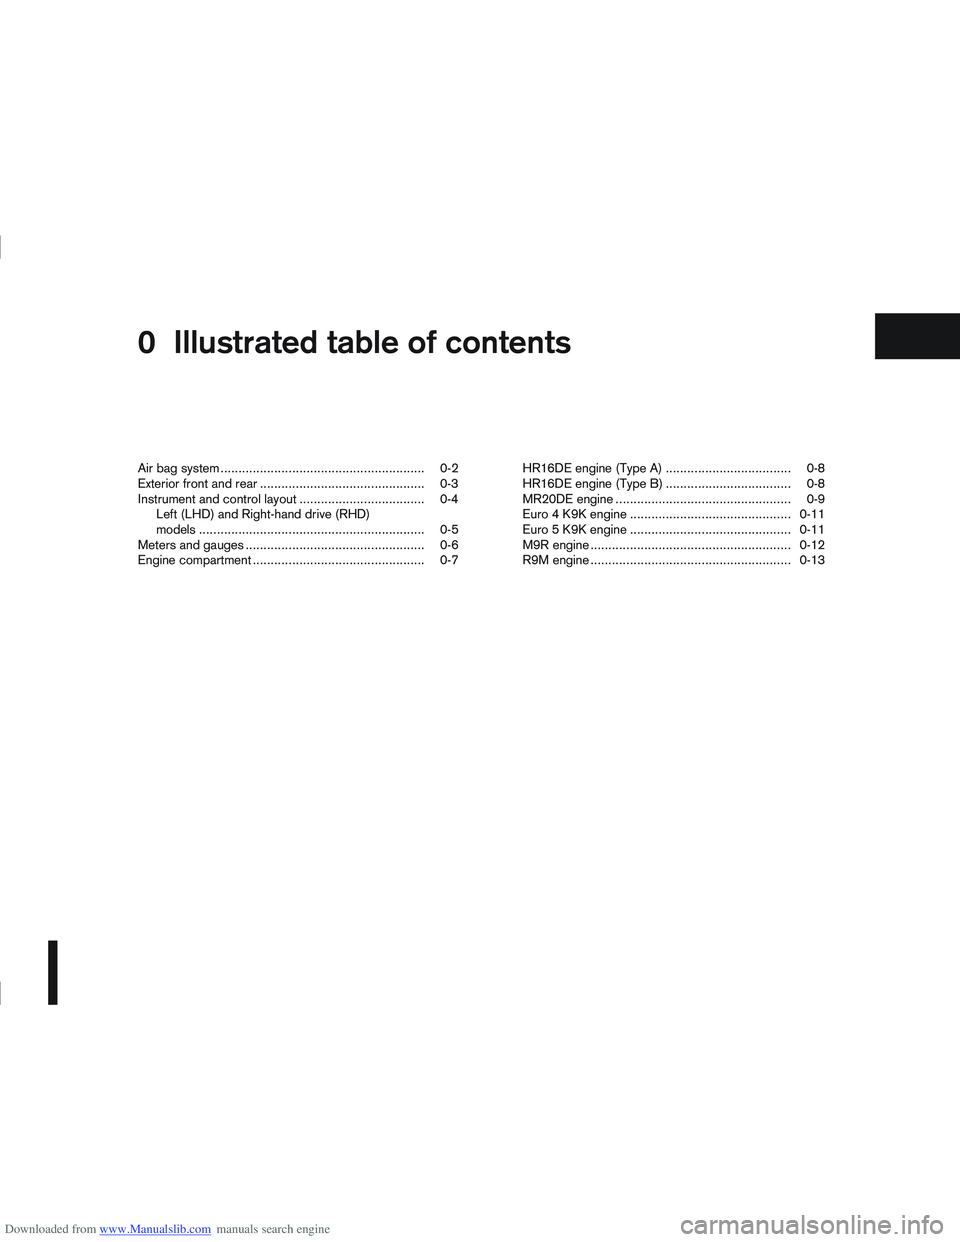 NISSAN QASHQAI 2011  Owners Manual Downloaded from www.Manualslib.com manuals search engine 0Illustrated table of contents
Illustrated table of contents
Air bag system ......................................................... 0-2
Exter